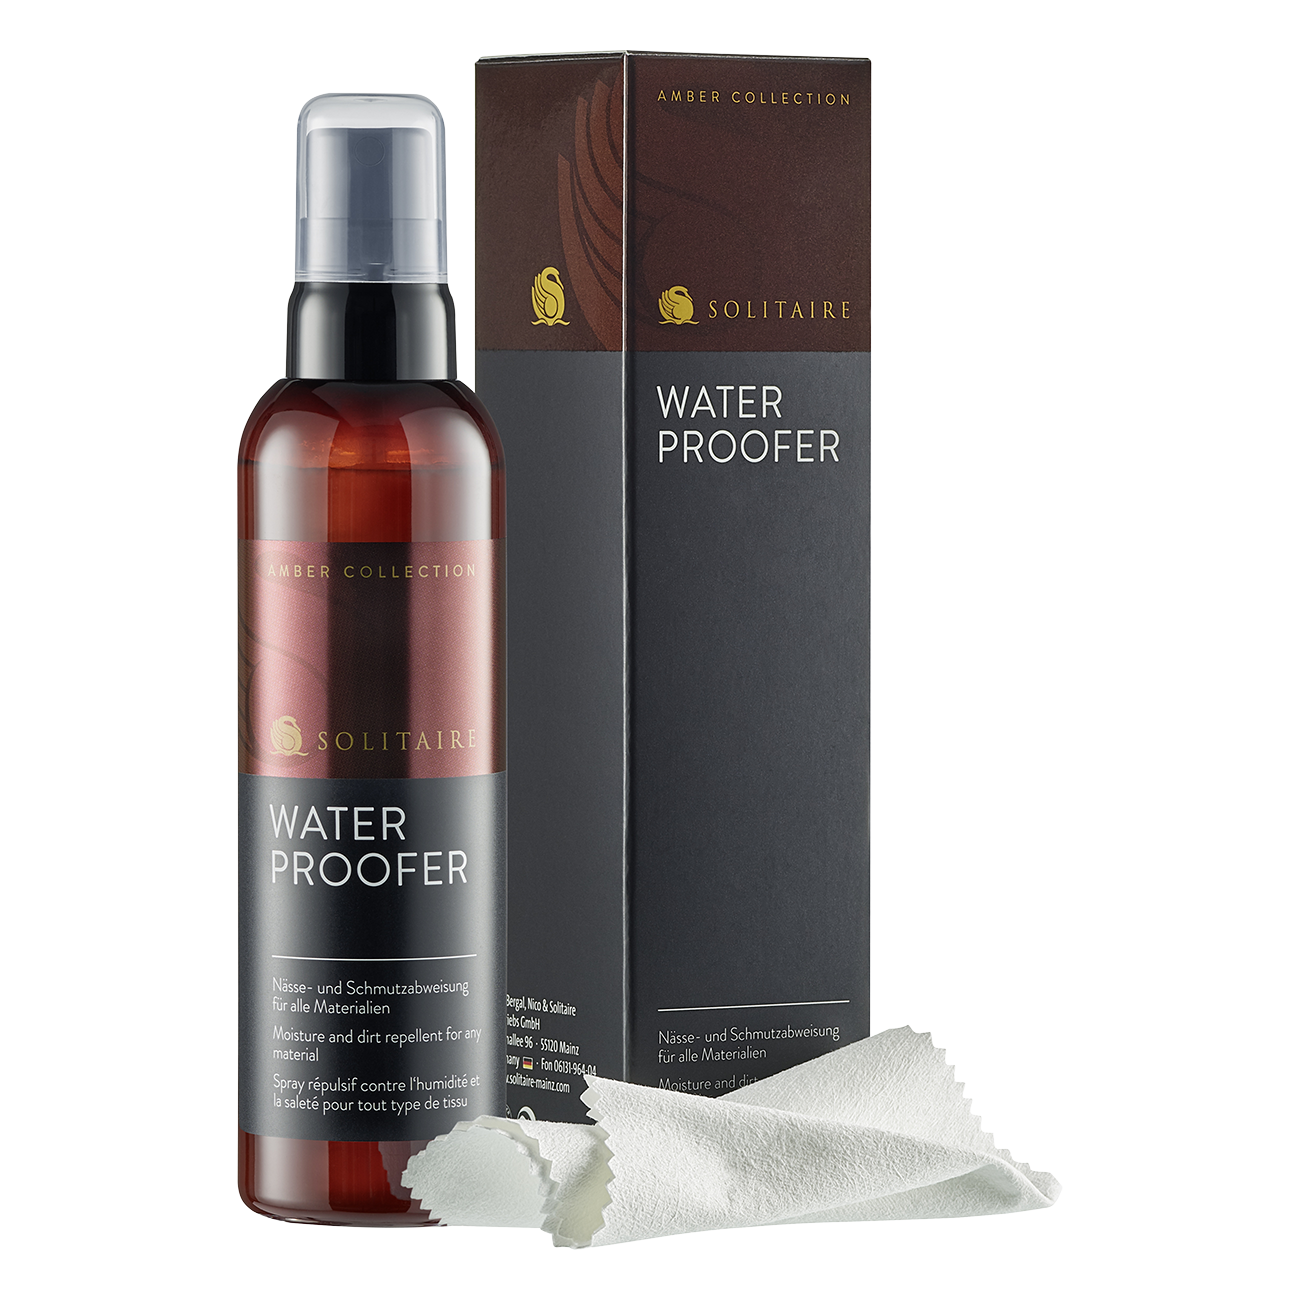 SOLITAIRE WATER PROOFER SET